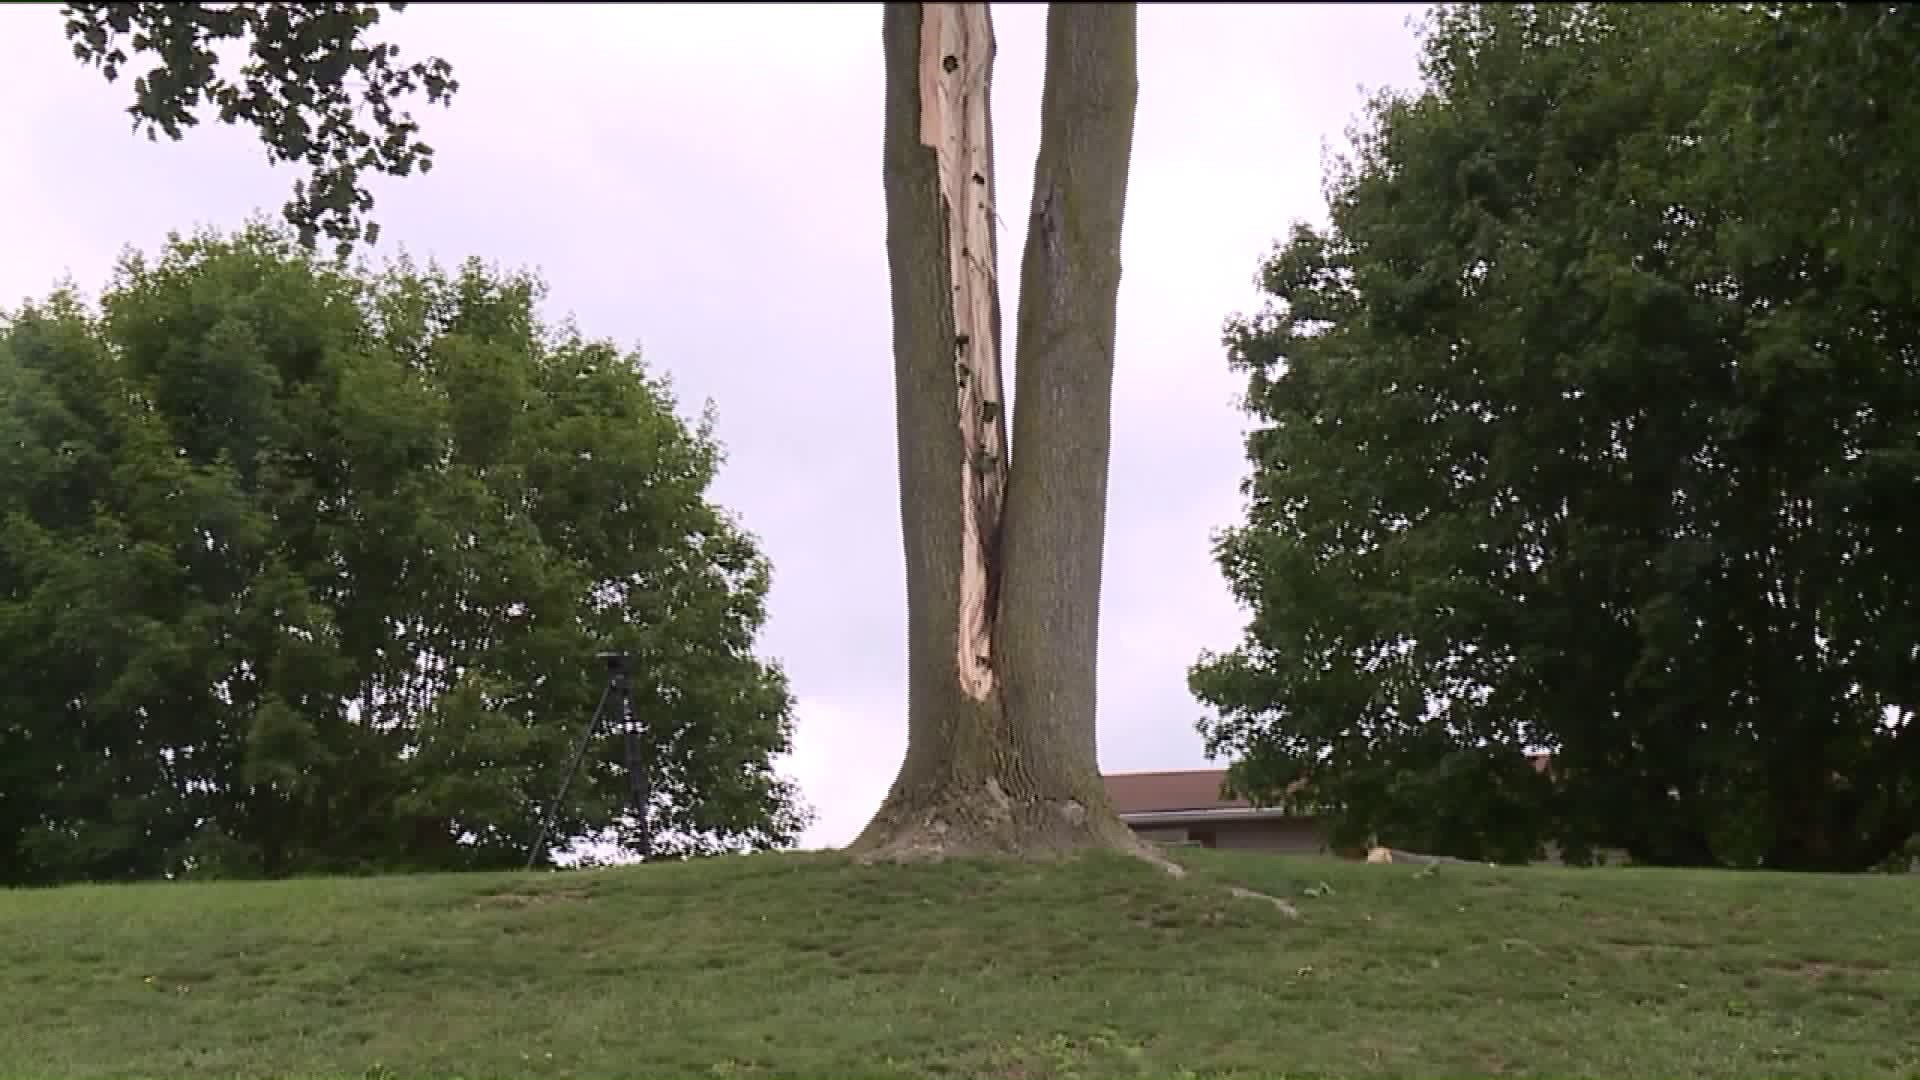 Family Cleaning Up After Lightning Strikes Tree